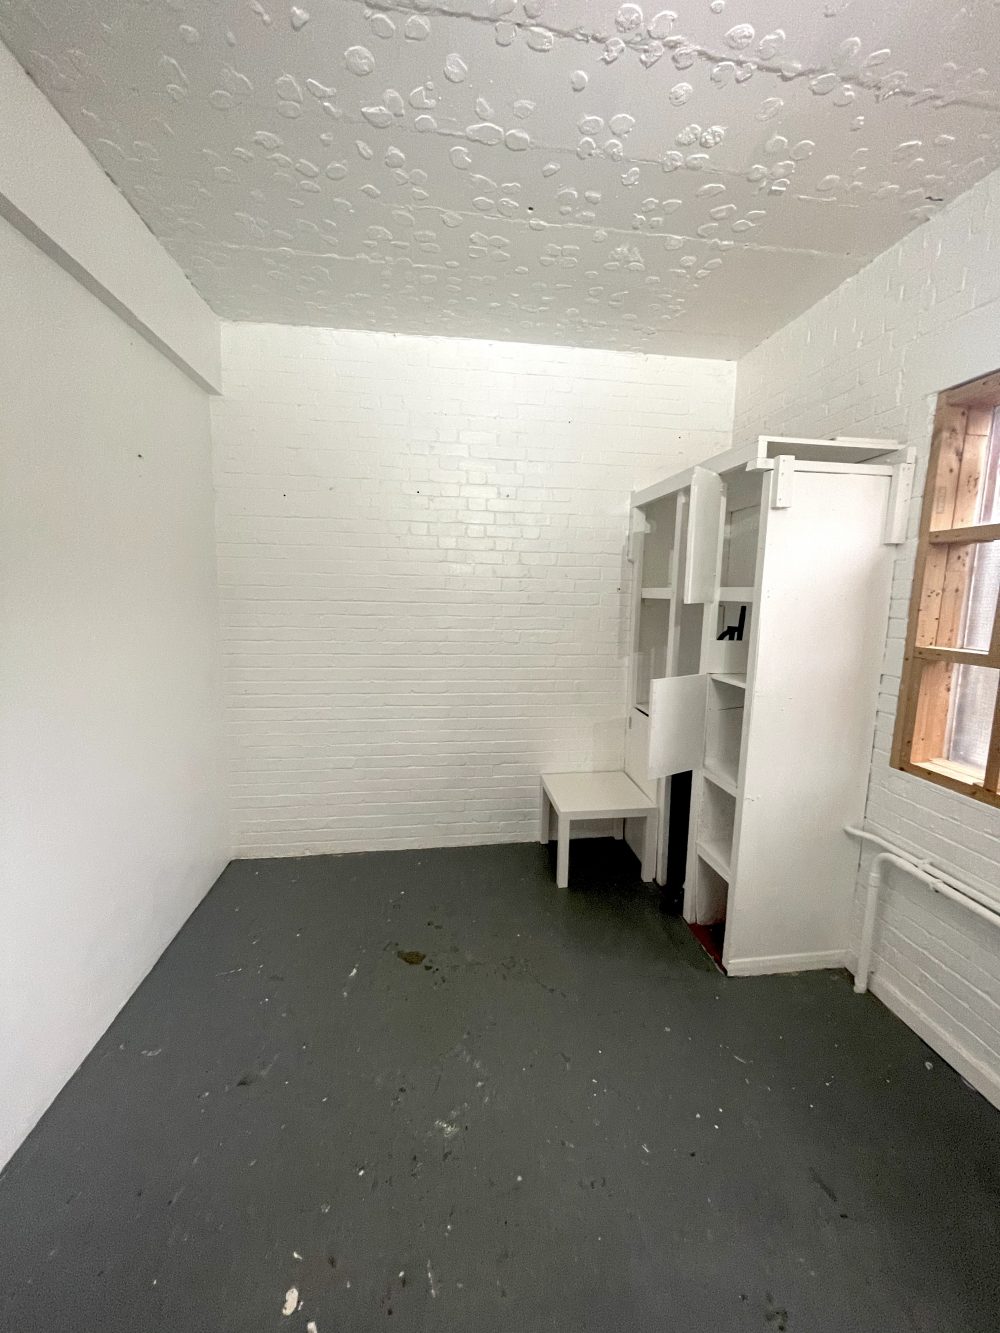 Ground Floor Warehouse Studio Available to rent in N15 Markfield Rd Pic2